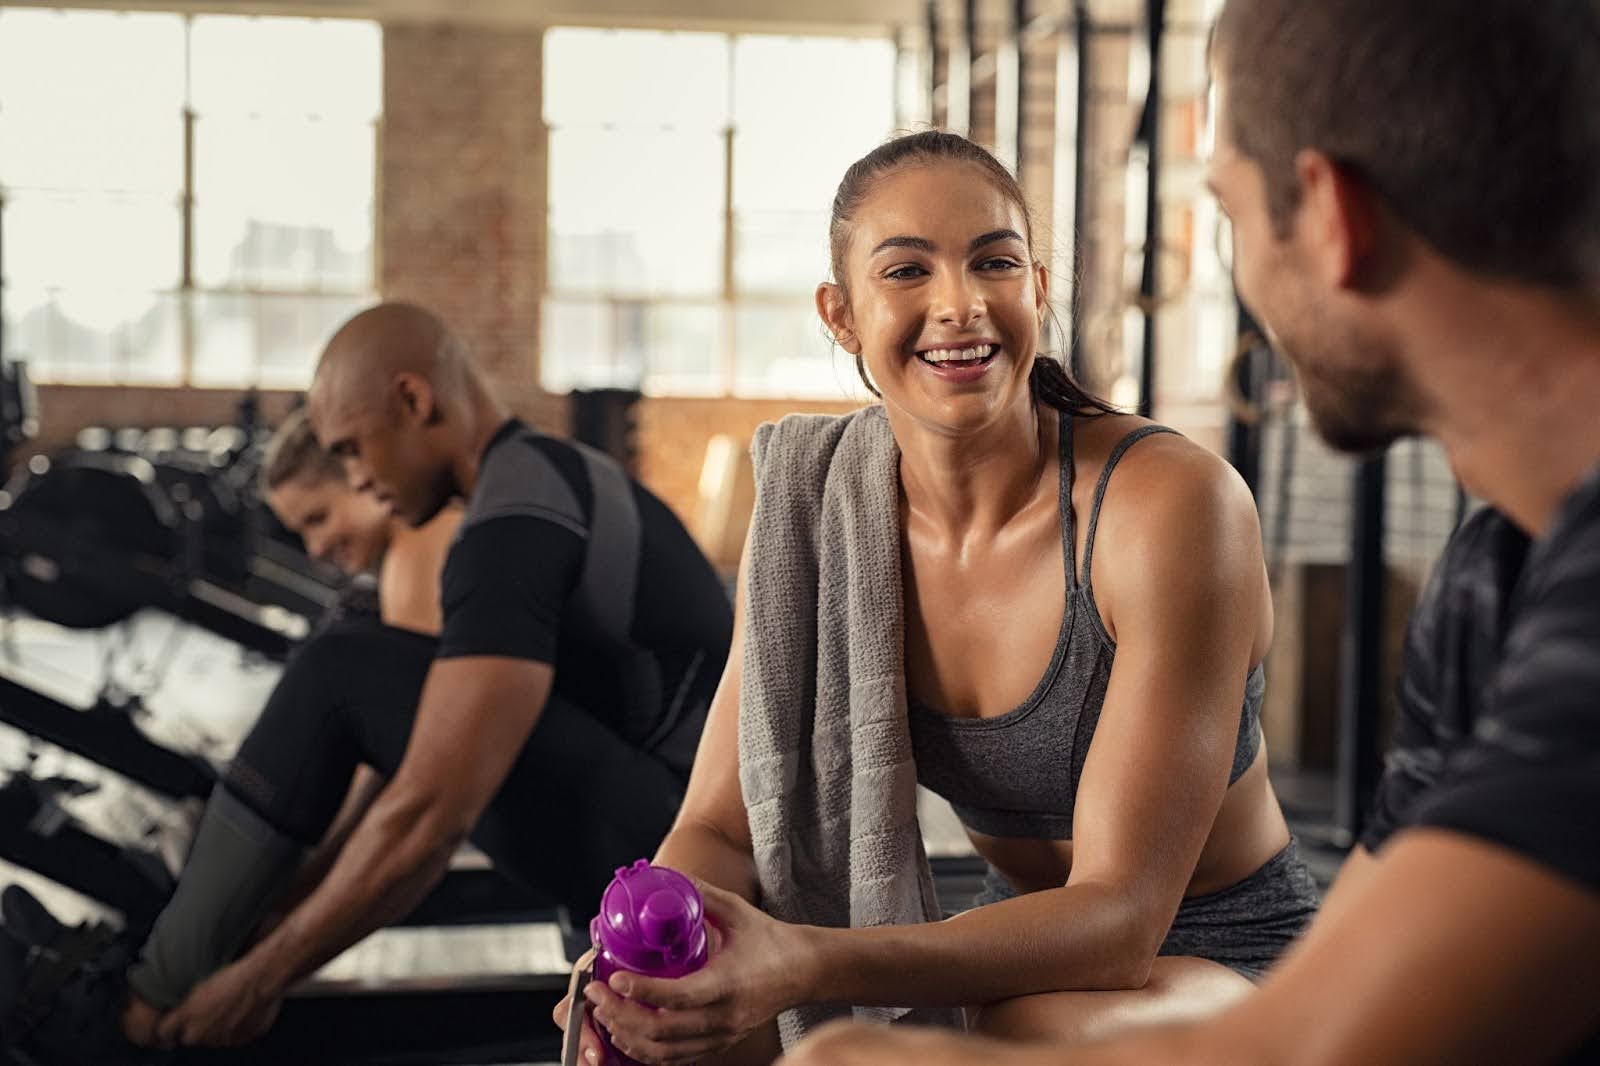 Smiling fit woman at a gym taking a fitness challenge